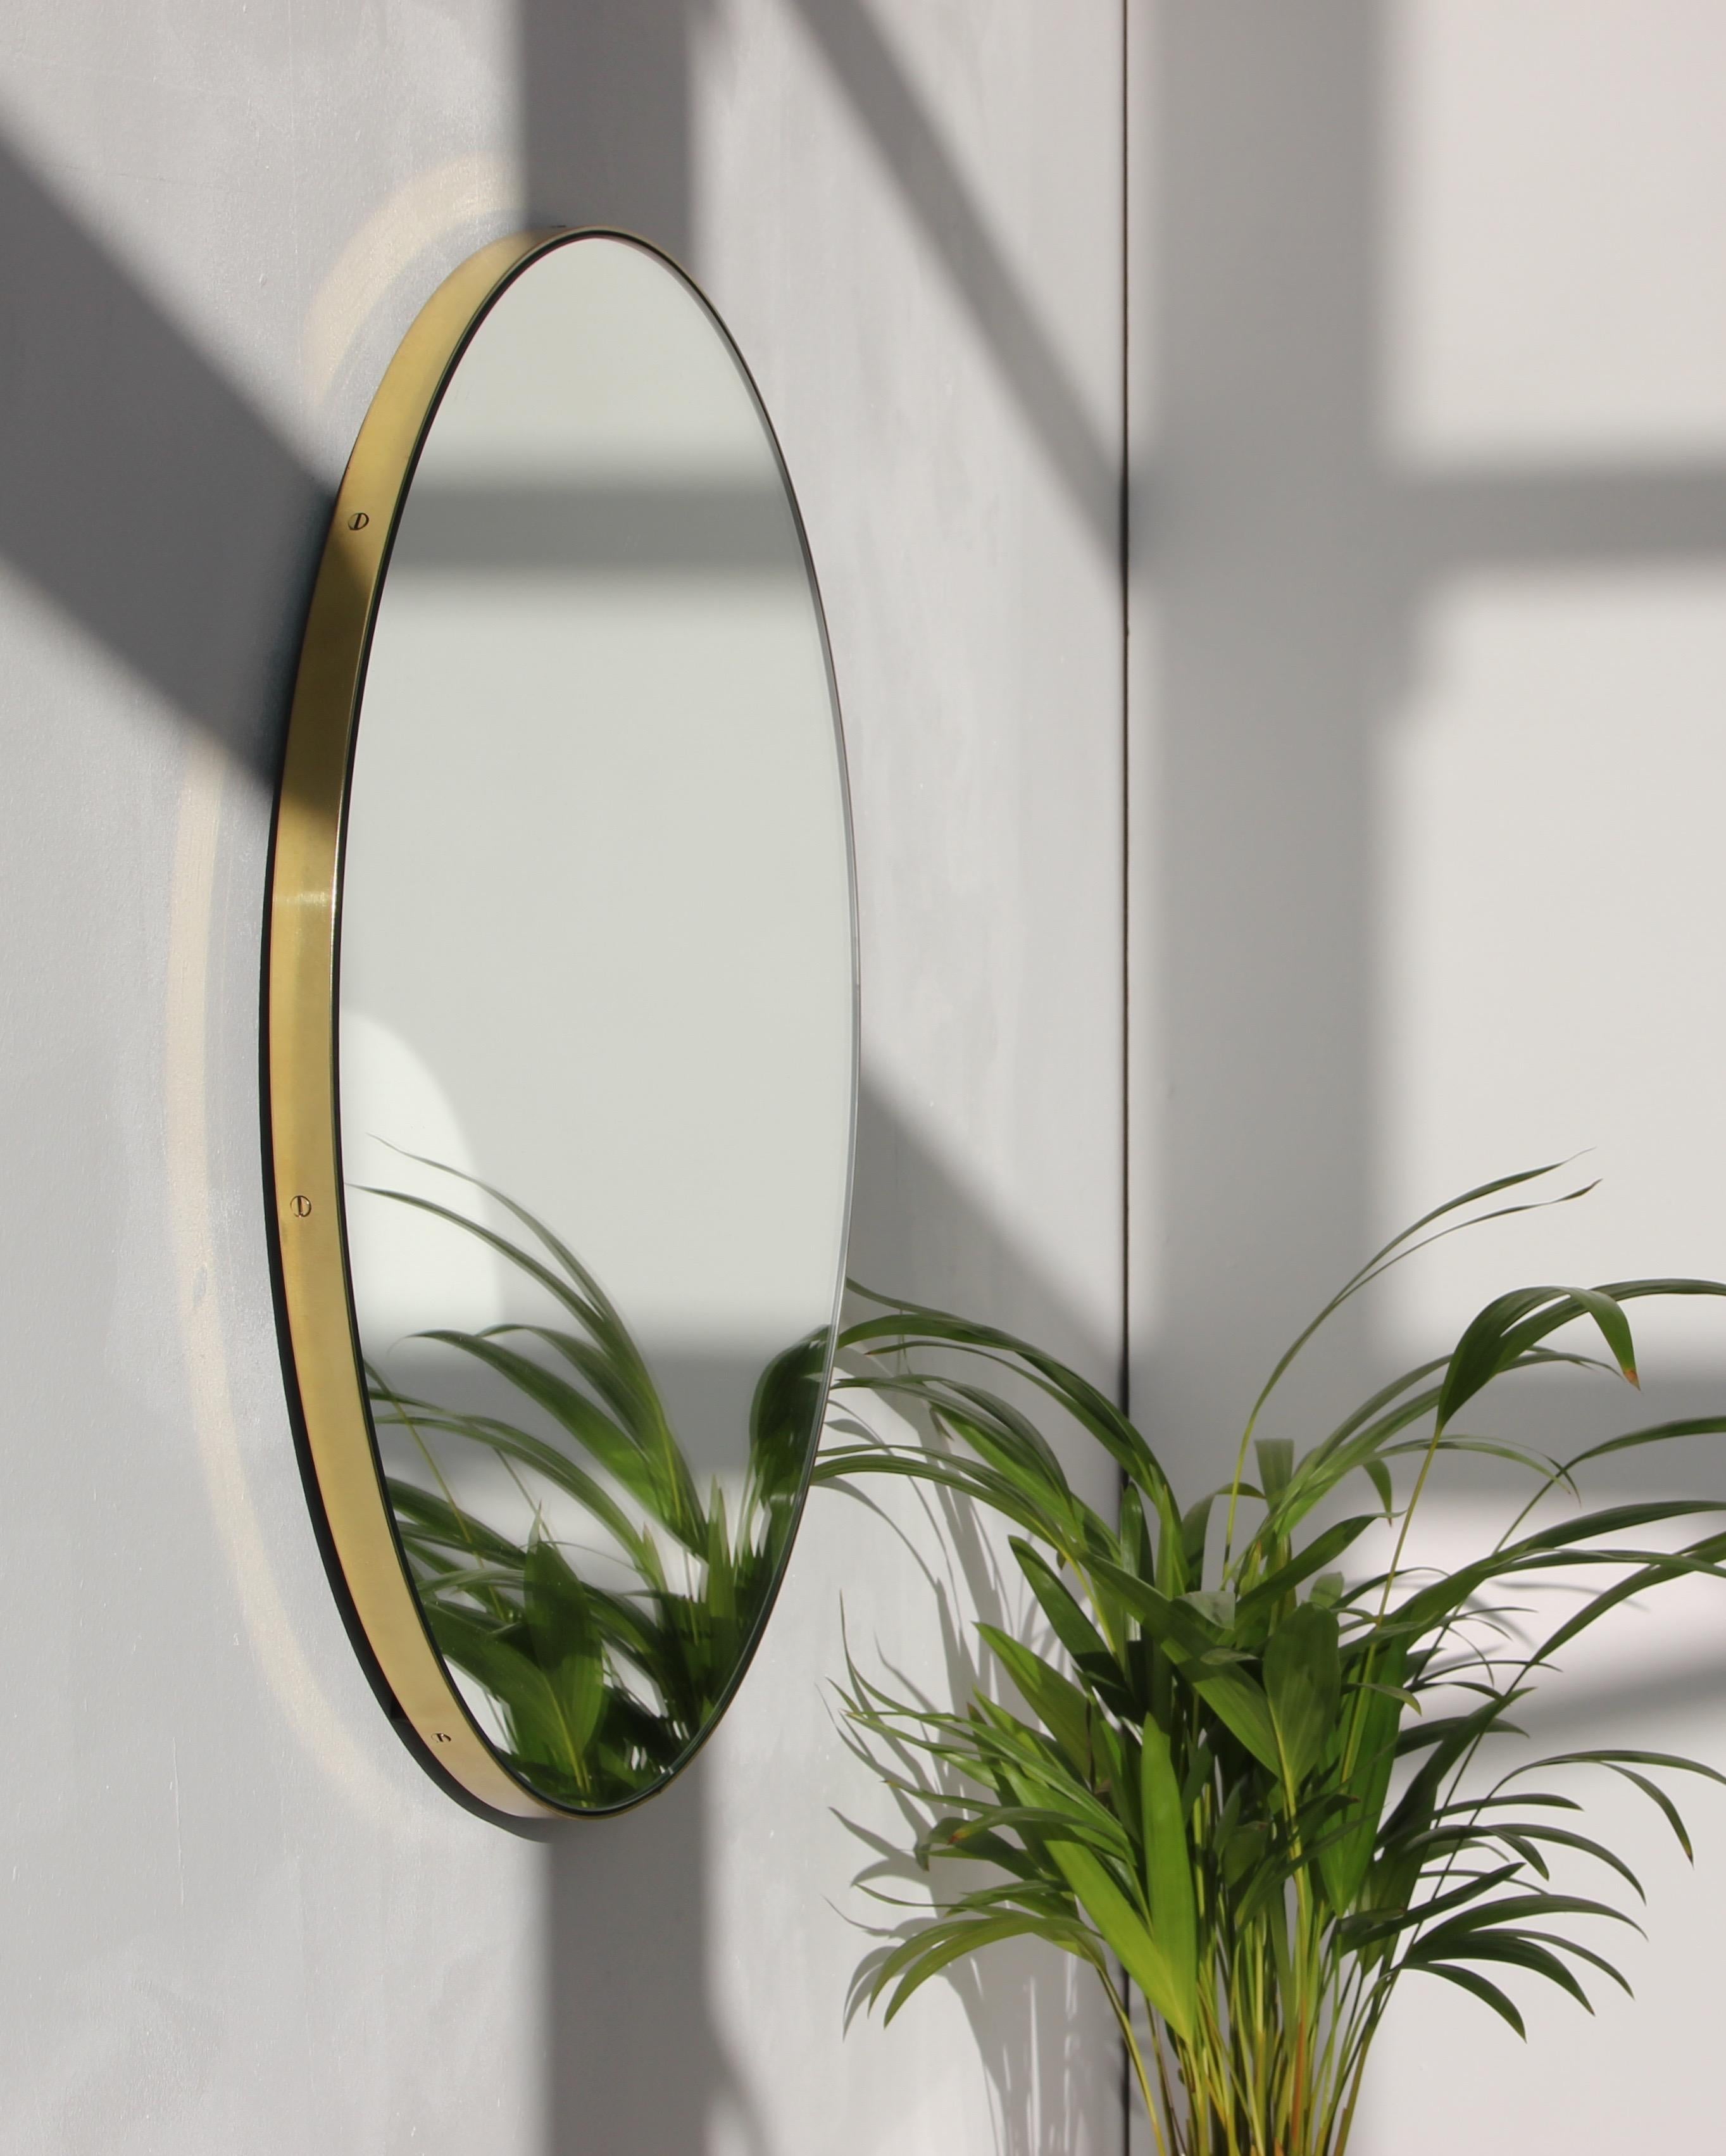 Minimalist Orbis™ round mirror with an elegant solid brushed brass frame. The detailing and finish, including visible brass screws, emphasise the crafty and quality feel of the mirror, a true signature of our brand. Designed and handcrafted in